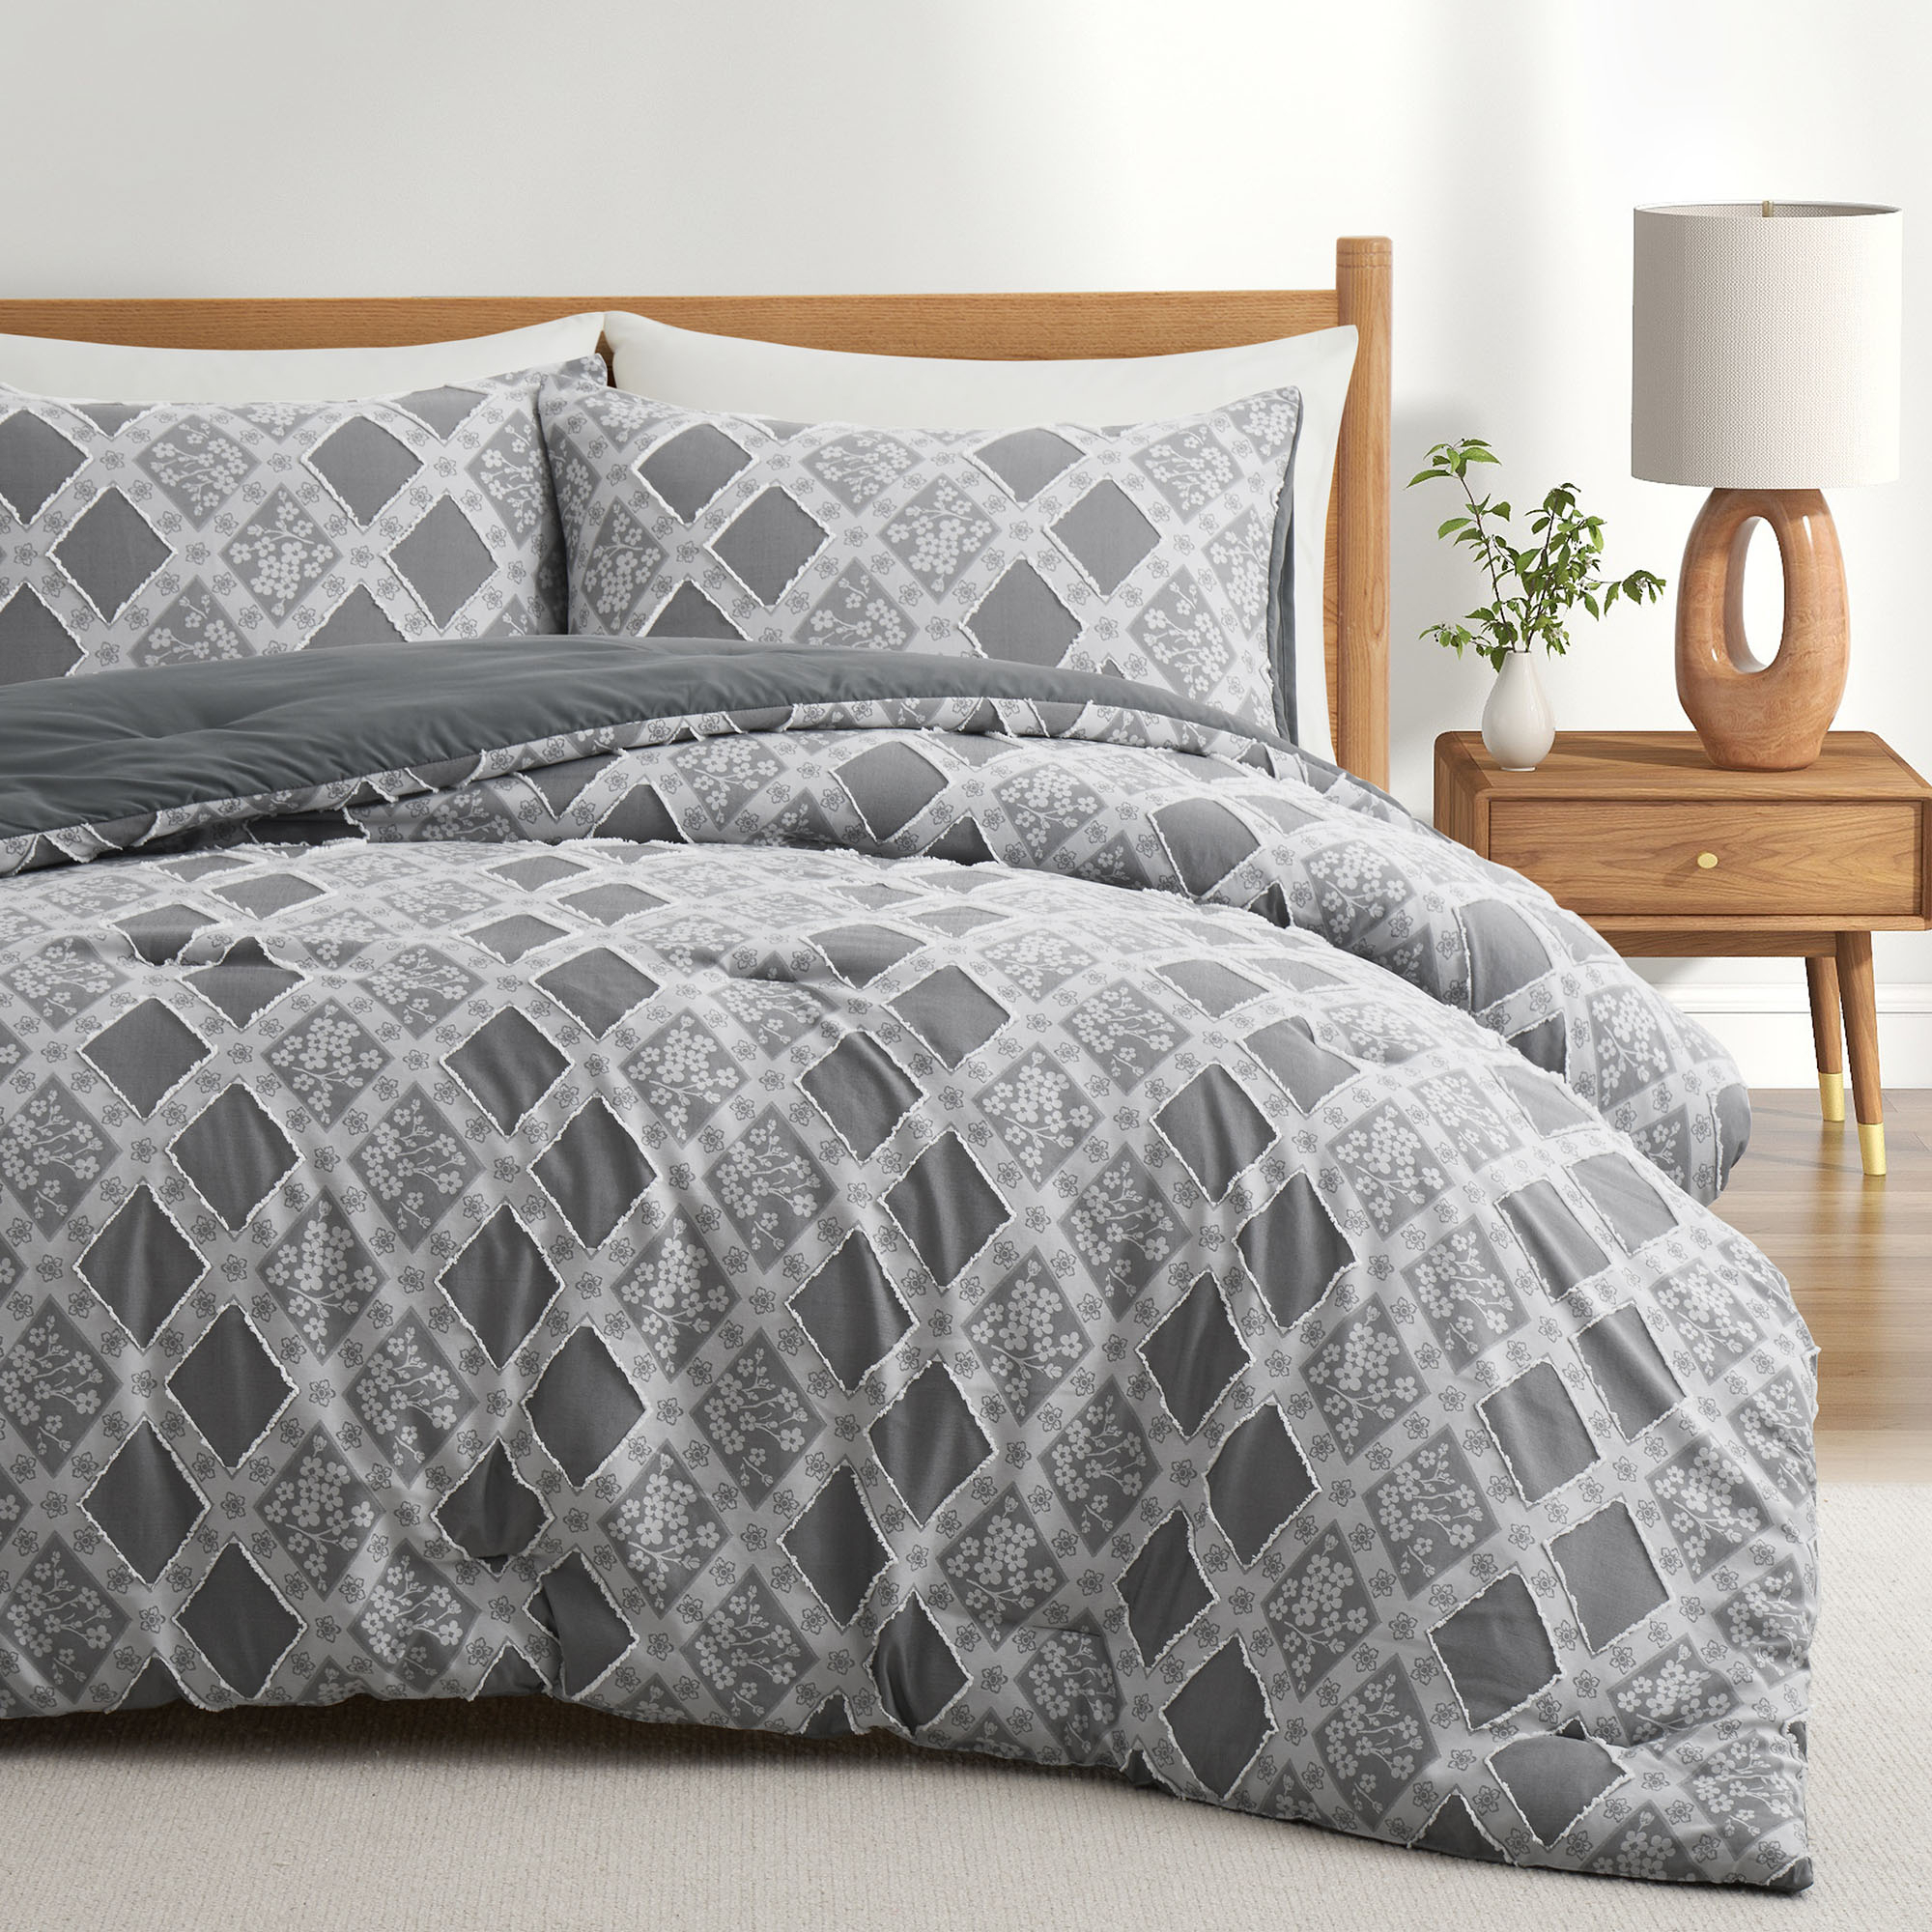 Ultra Soft Down Alternative Comforter Set With Matching Pillowcase- All-Season Warmth - Full/Queen